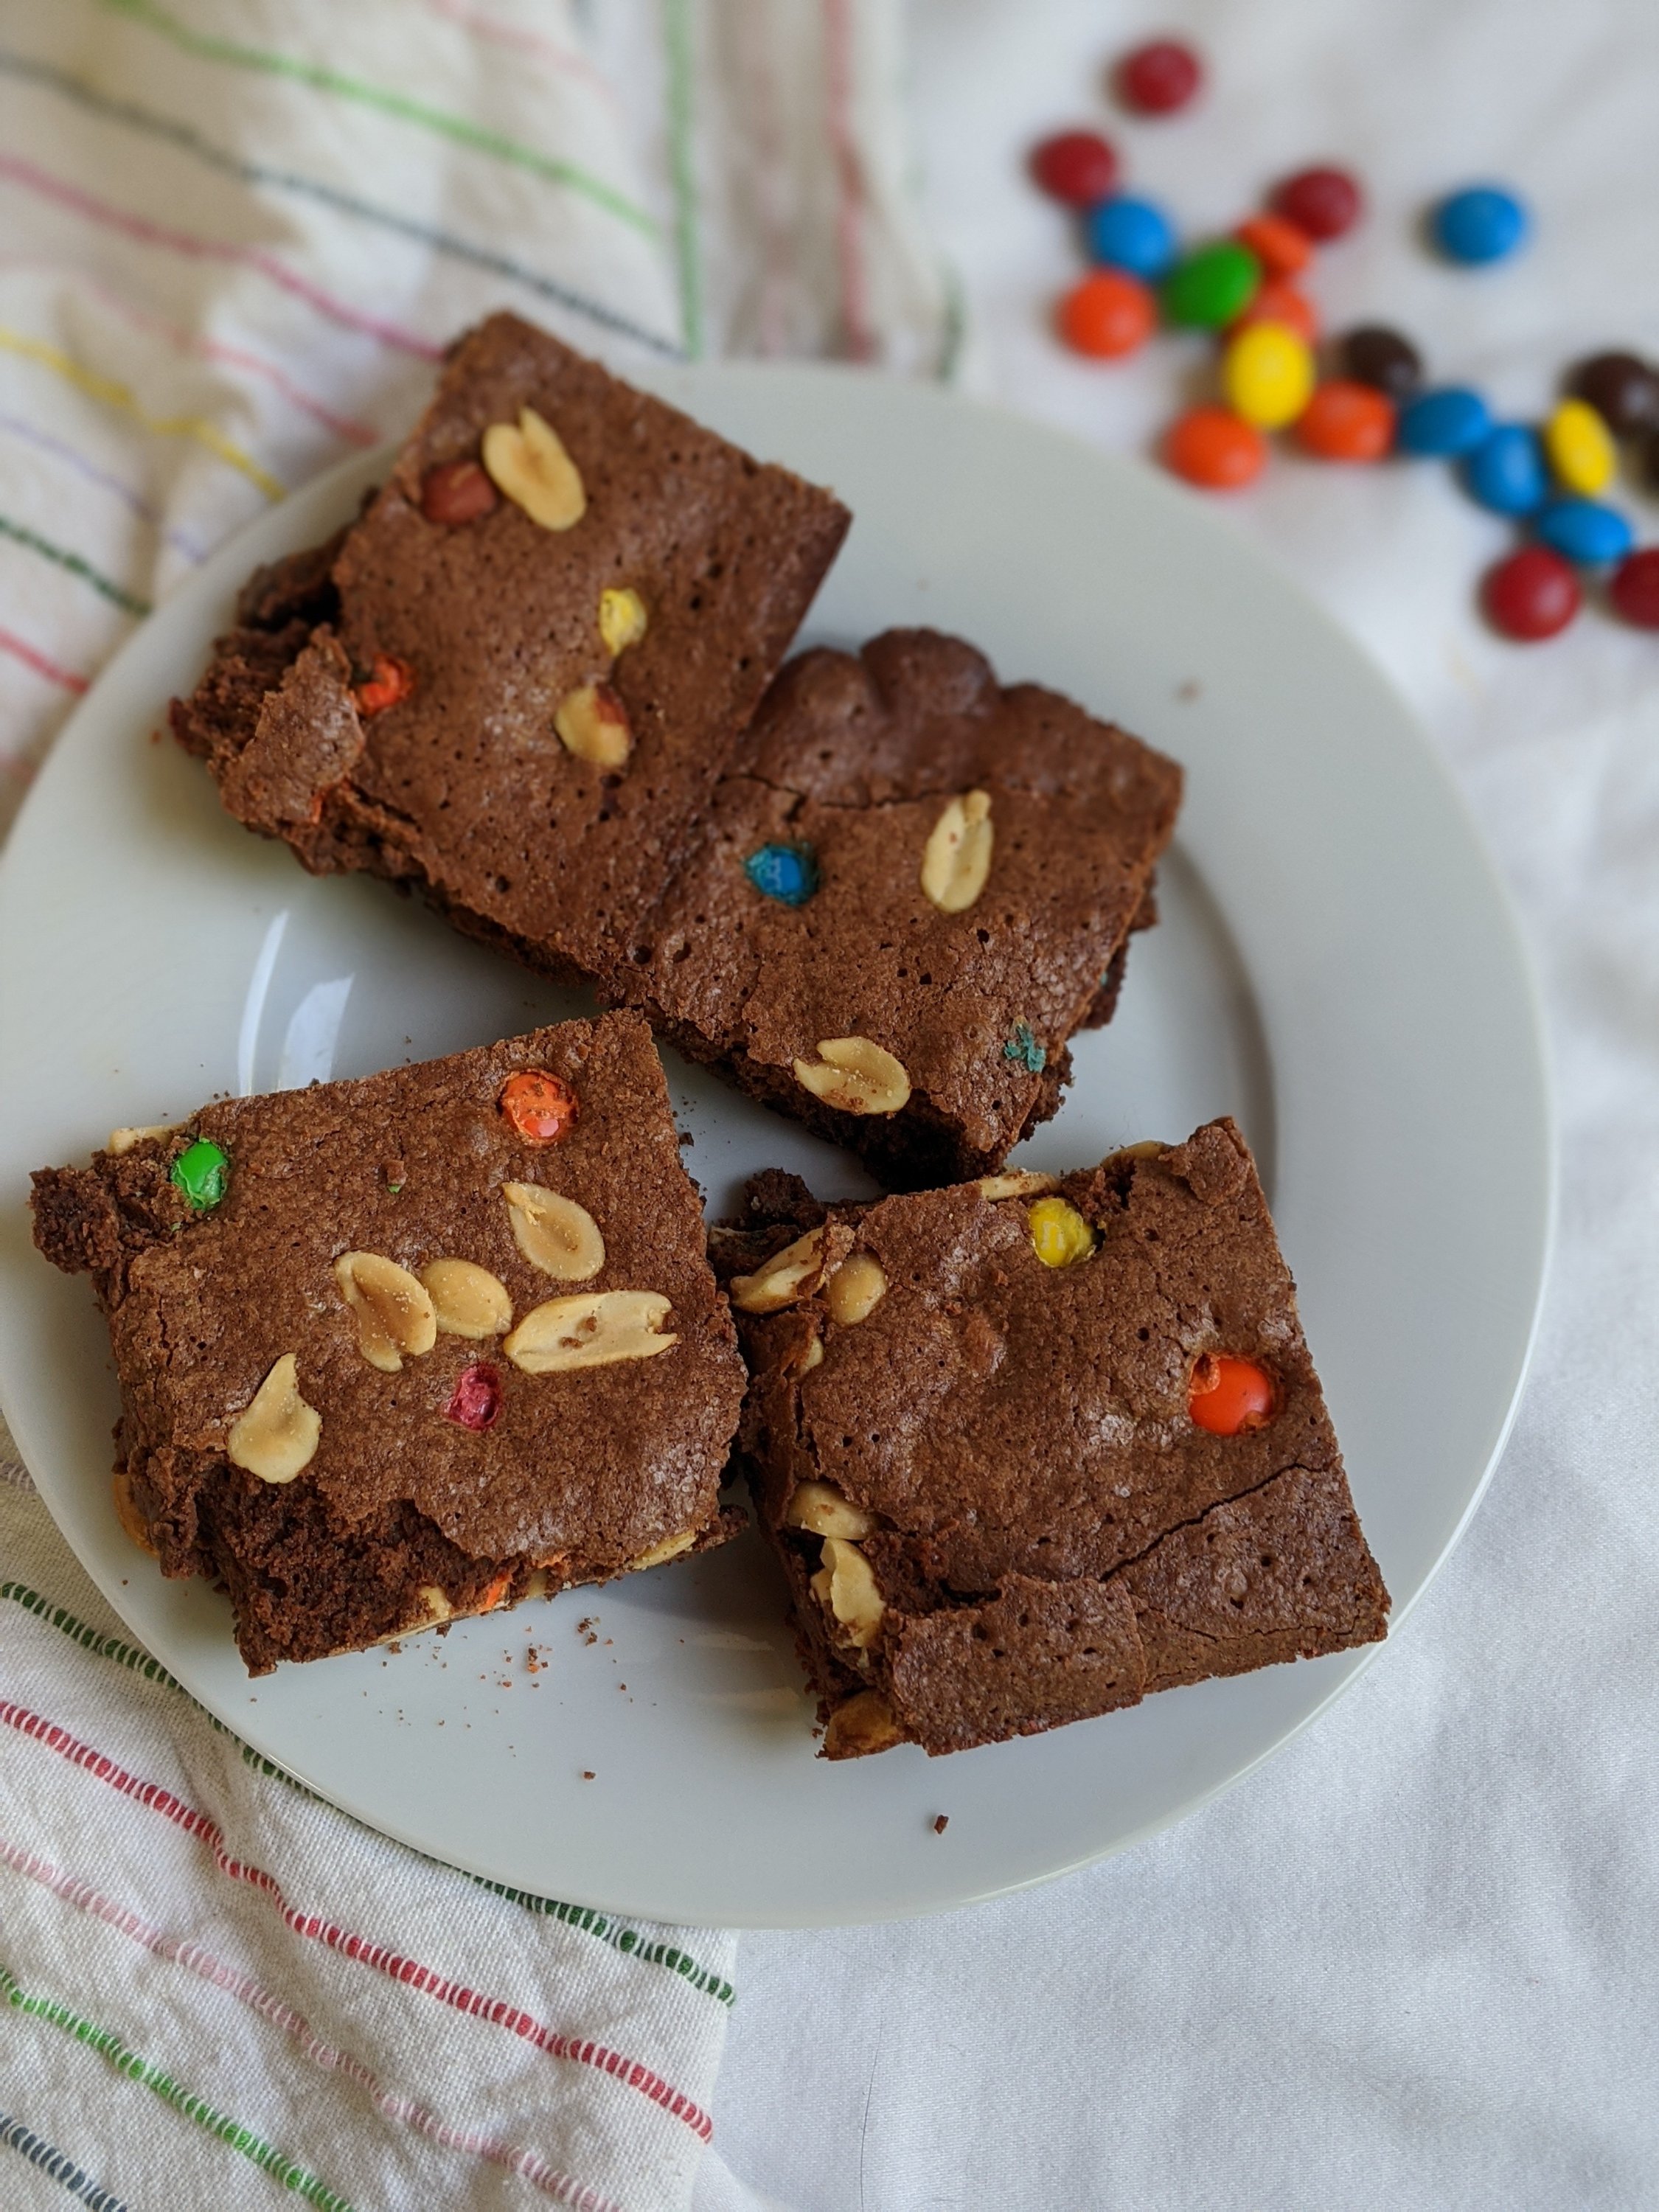 rainbow m&m brownies recipe can i use M&Ms instead of chocolate chips